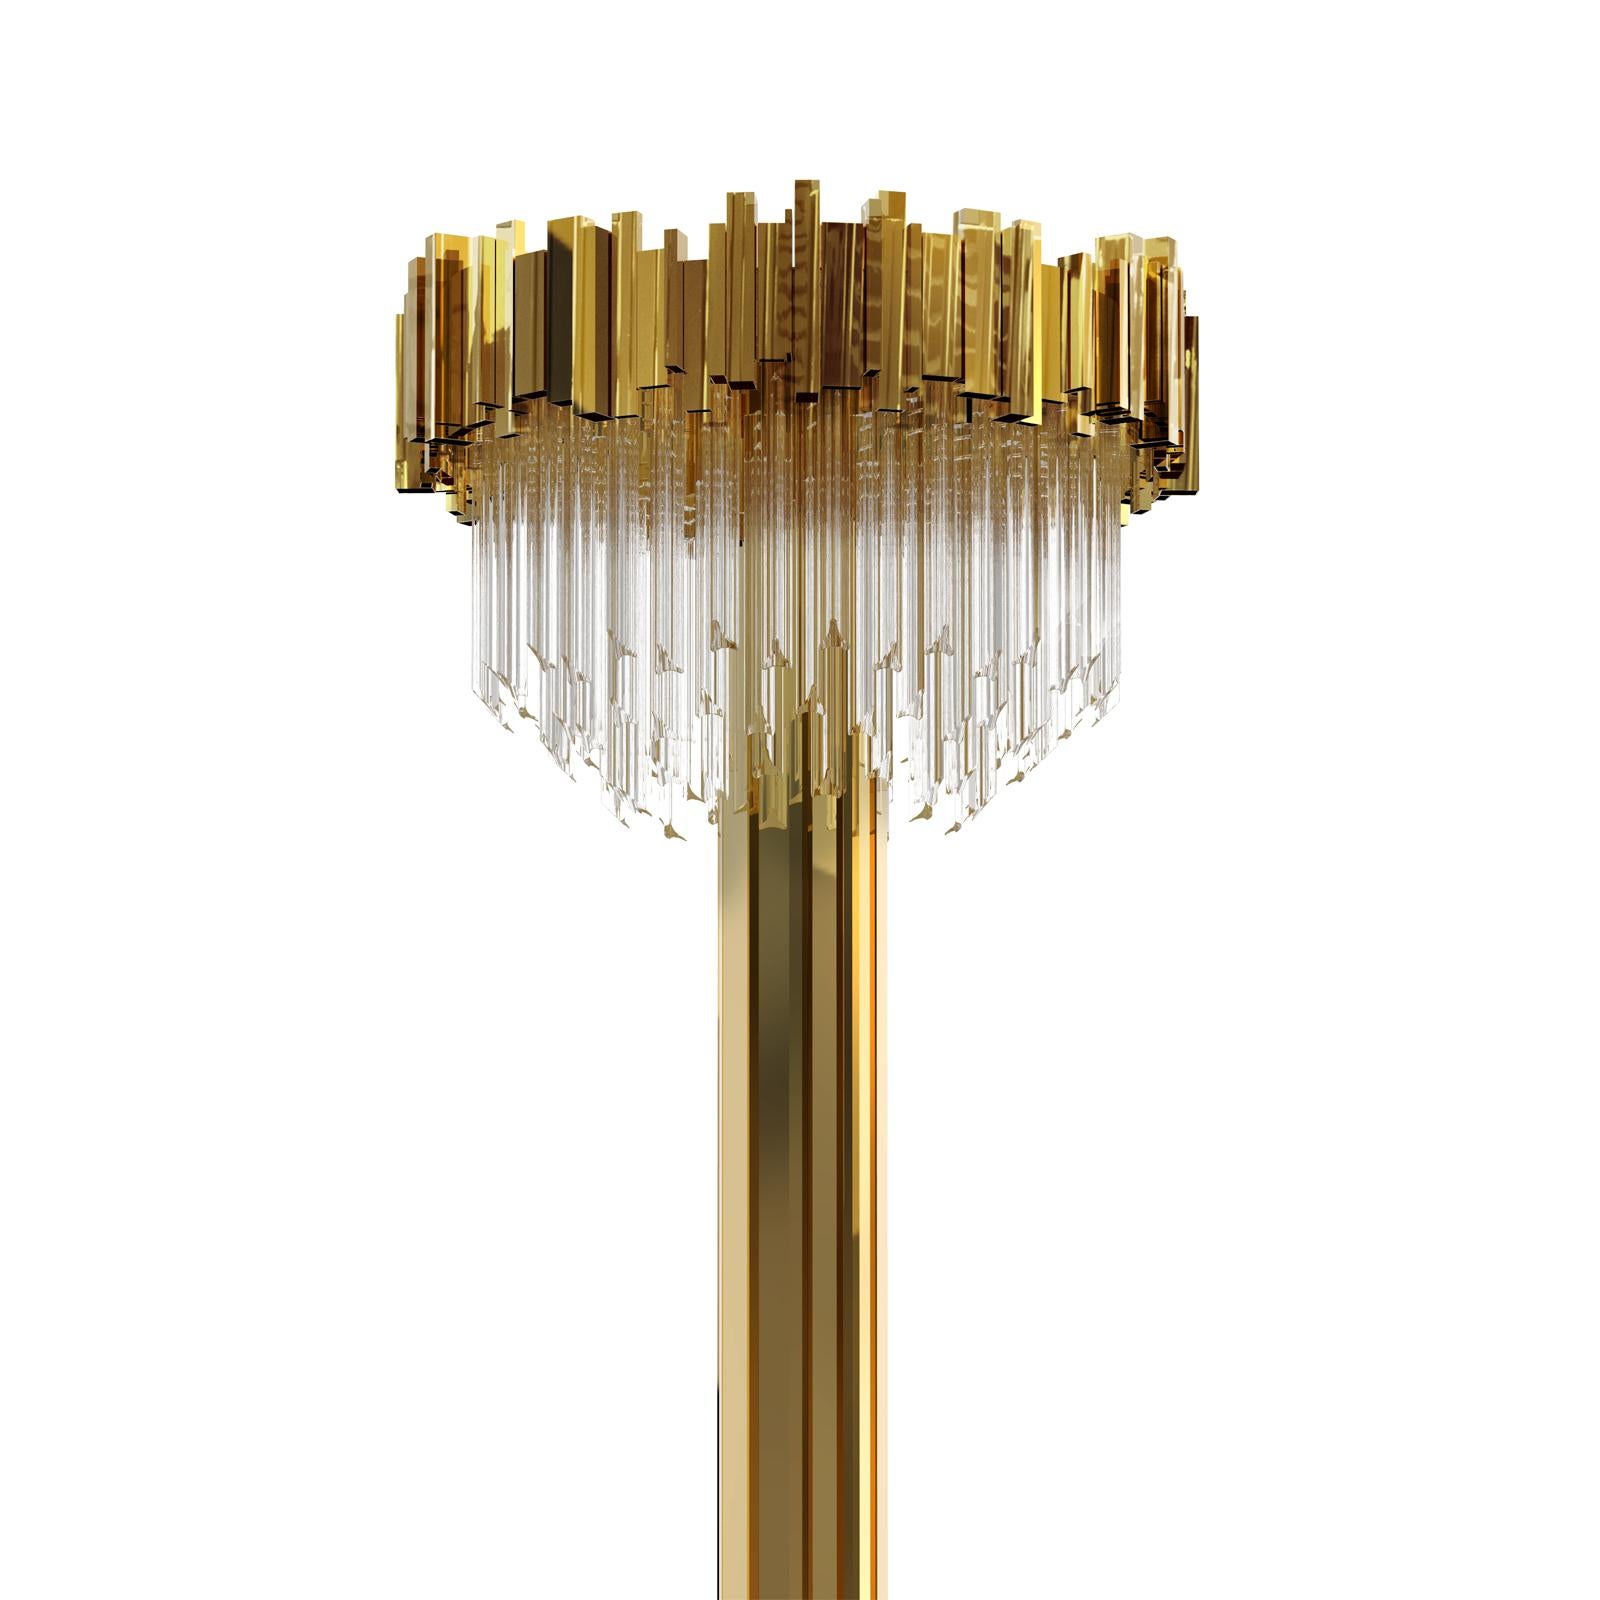 Floor lamp ambassador with crystal glass pendants.
With a circular rows of gold-plated polished brass
rectangular sticks. With 12 bulbs, lamp holder type G9.
20 watt max, for 220-240V. Bulbs not included.
     